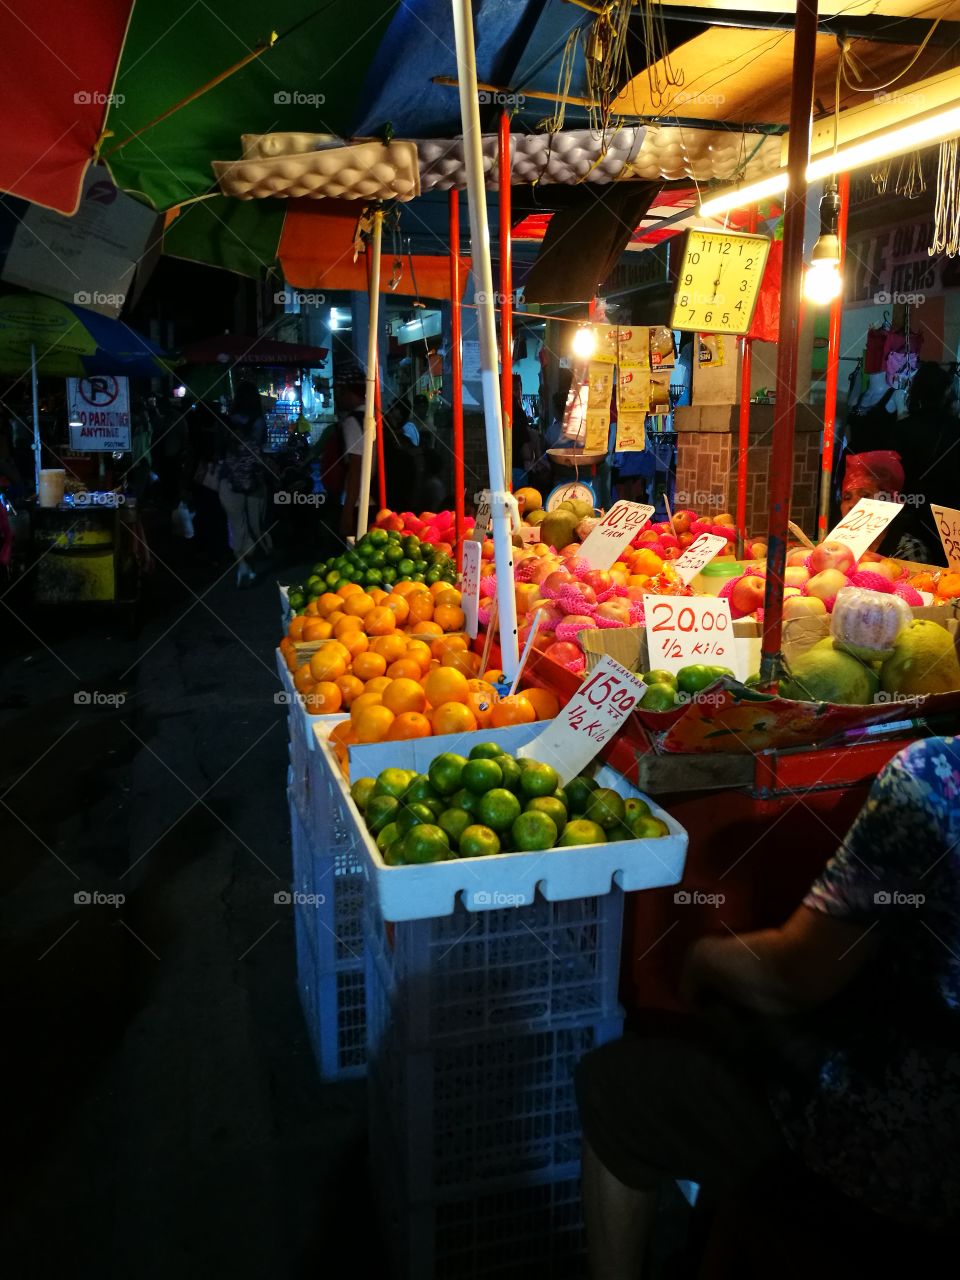 fruit stand out.
sphere fruits are real.
lets get greener.
 fruit is happines